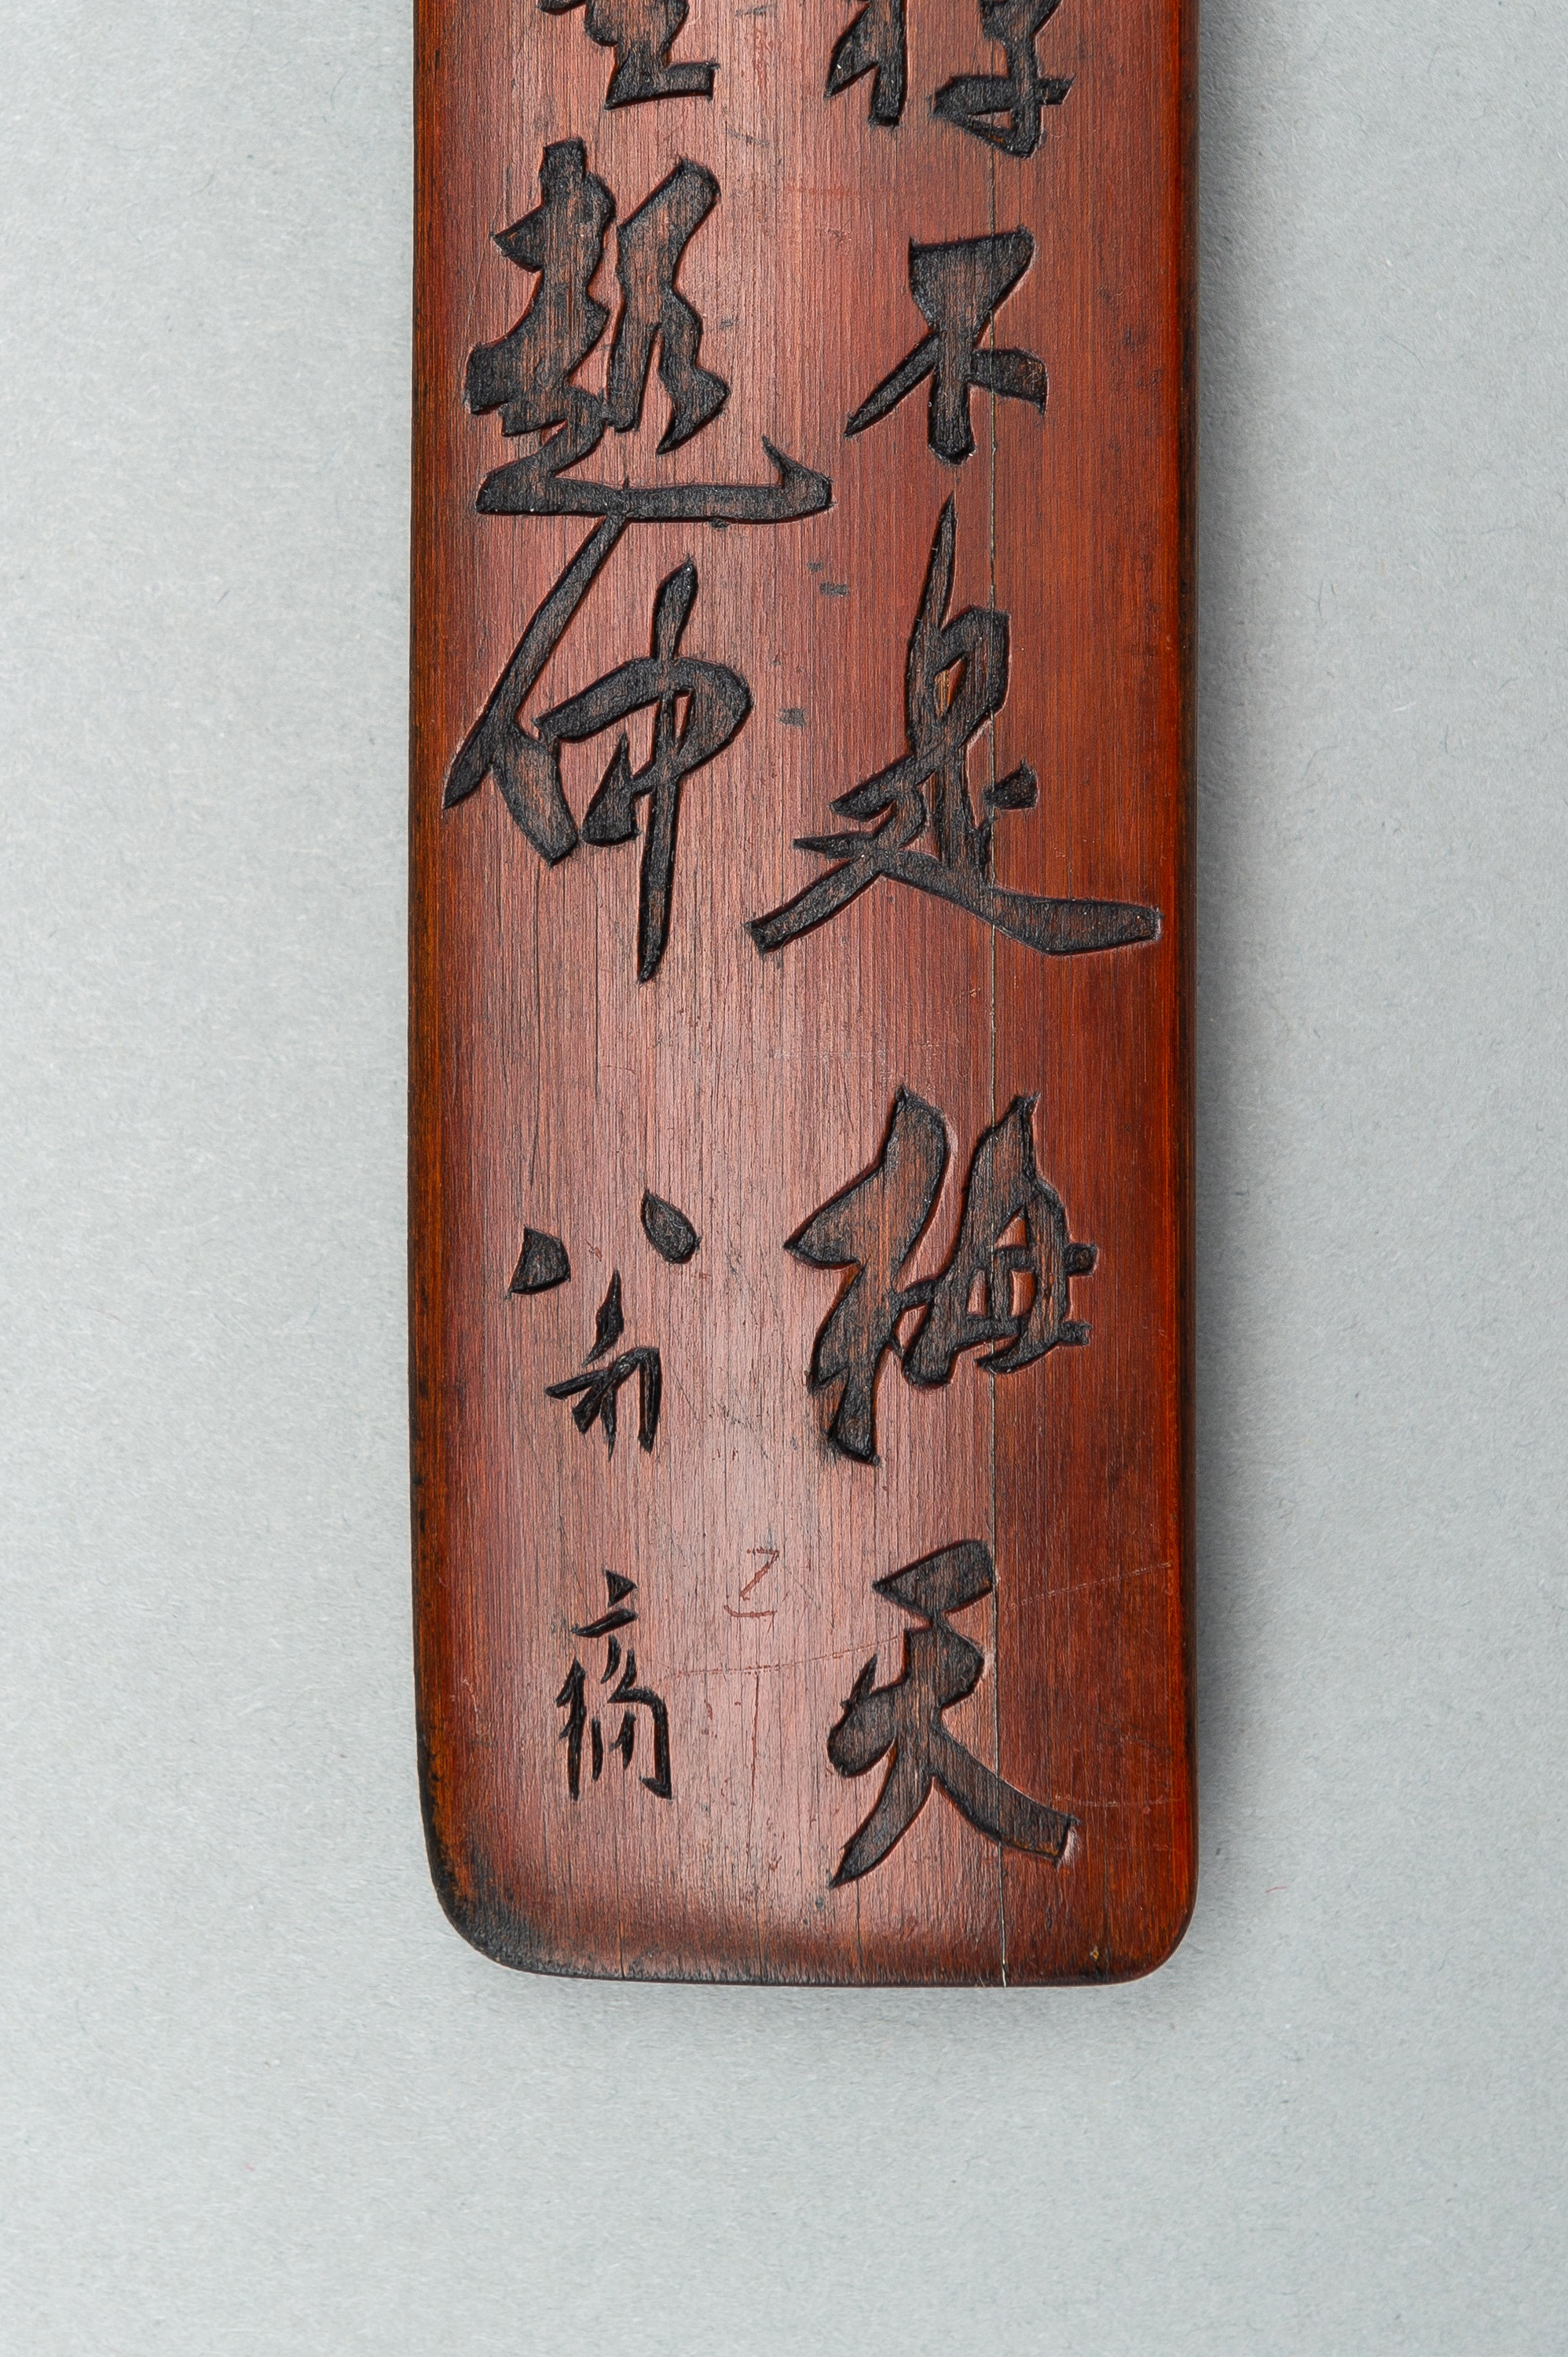 A BAMBOO WRIST REST WITH CALIGRAPHY - Image 5 of 9